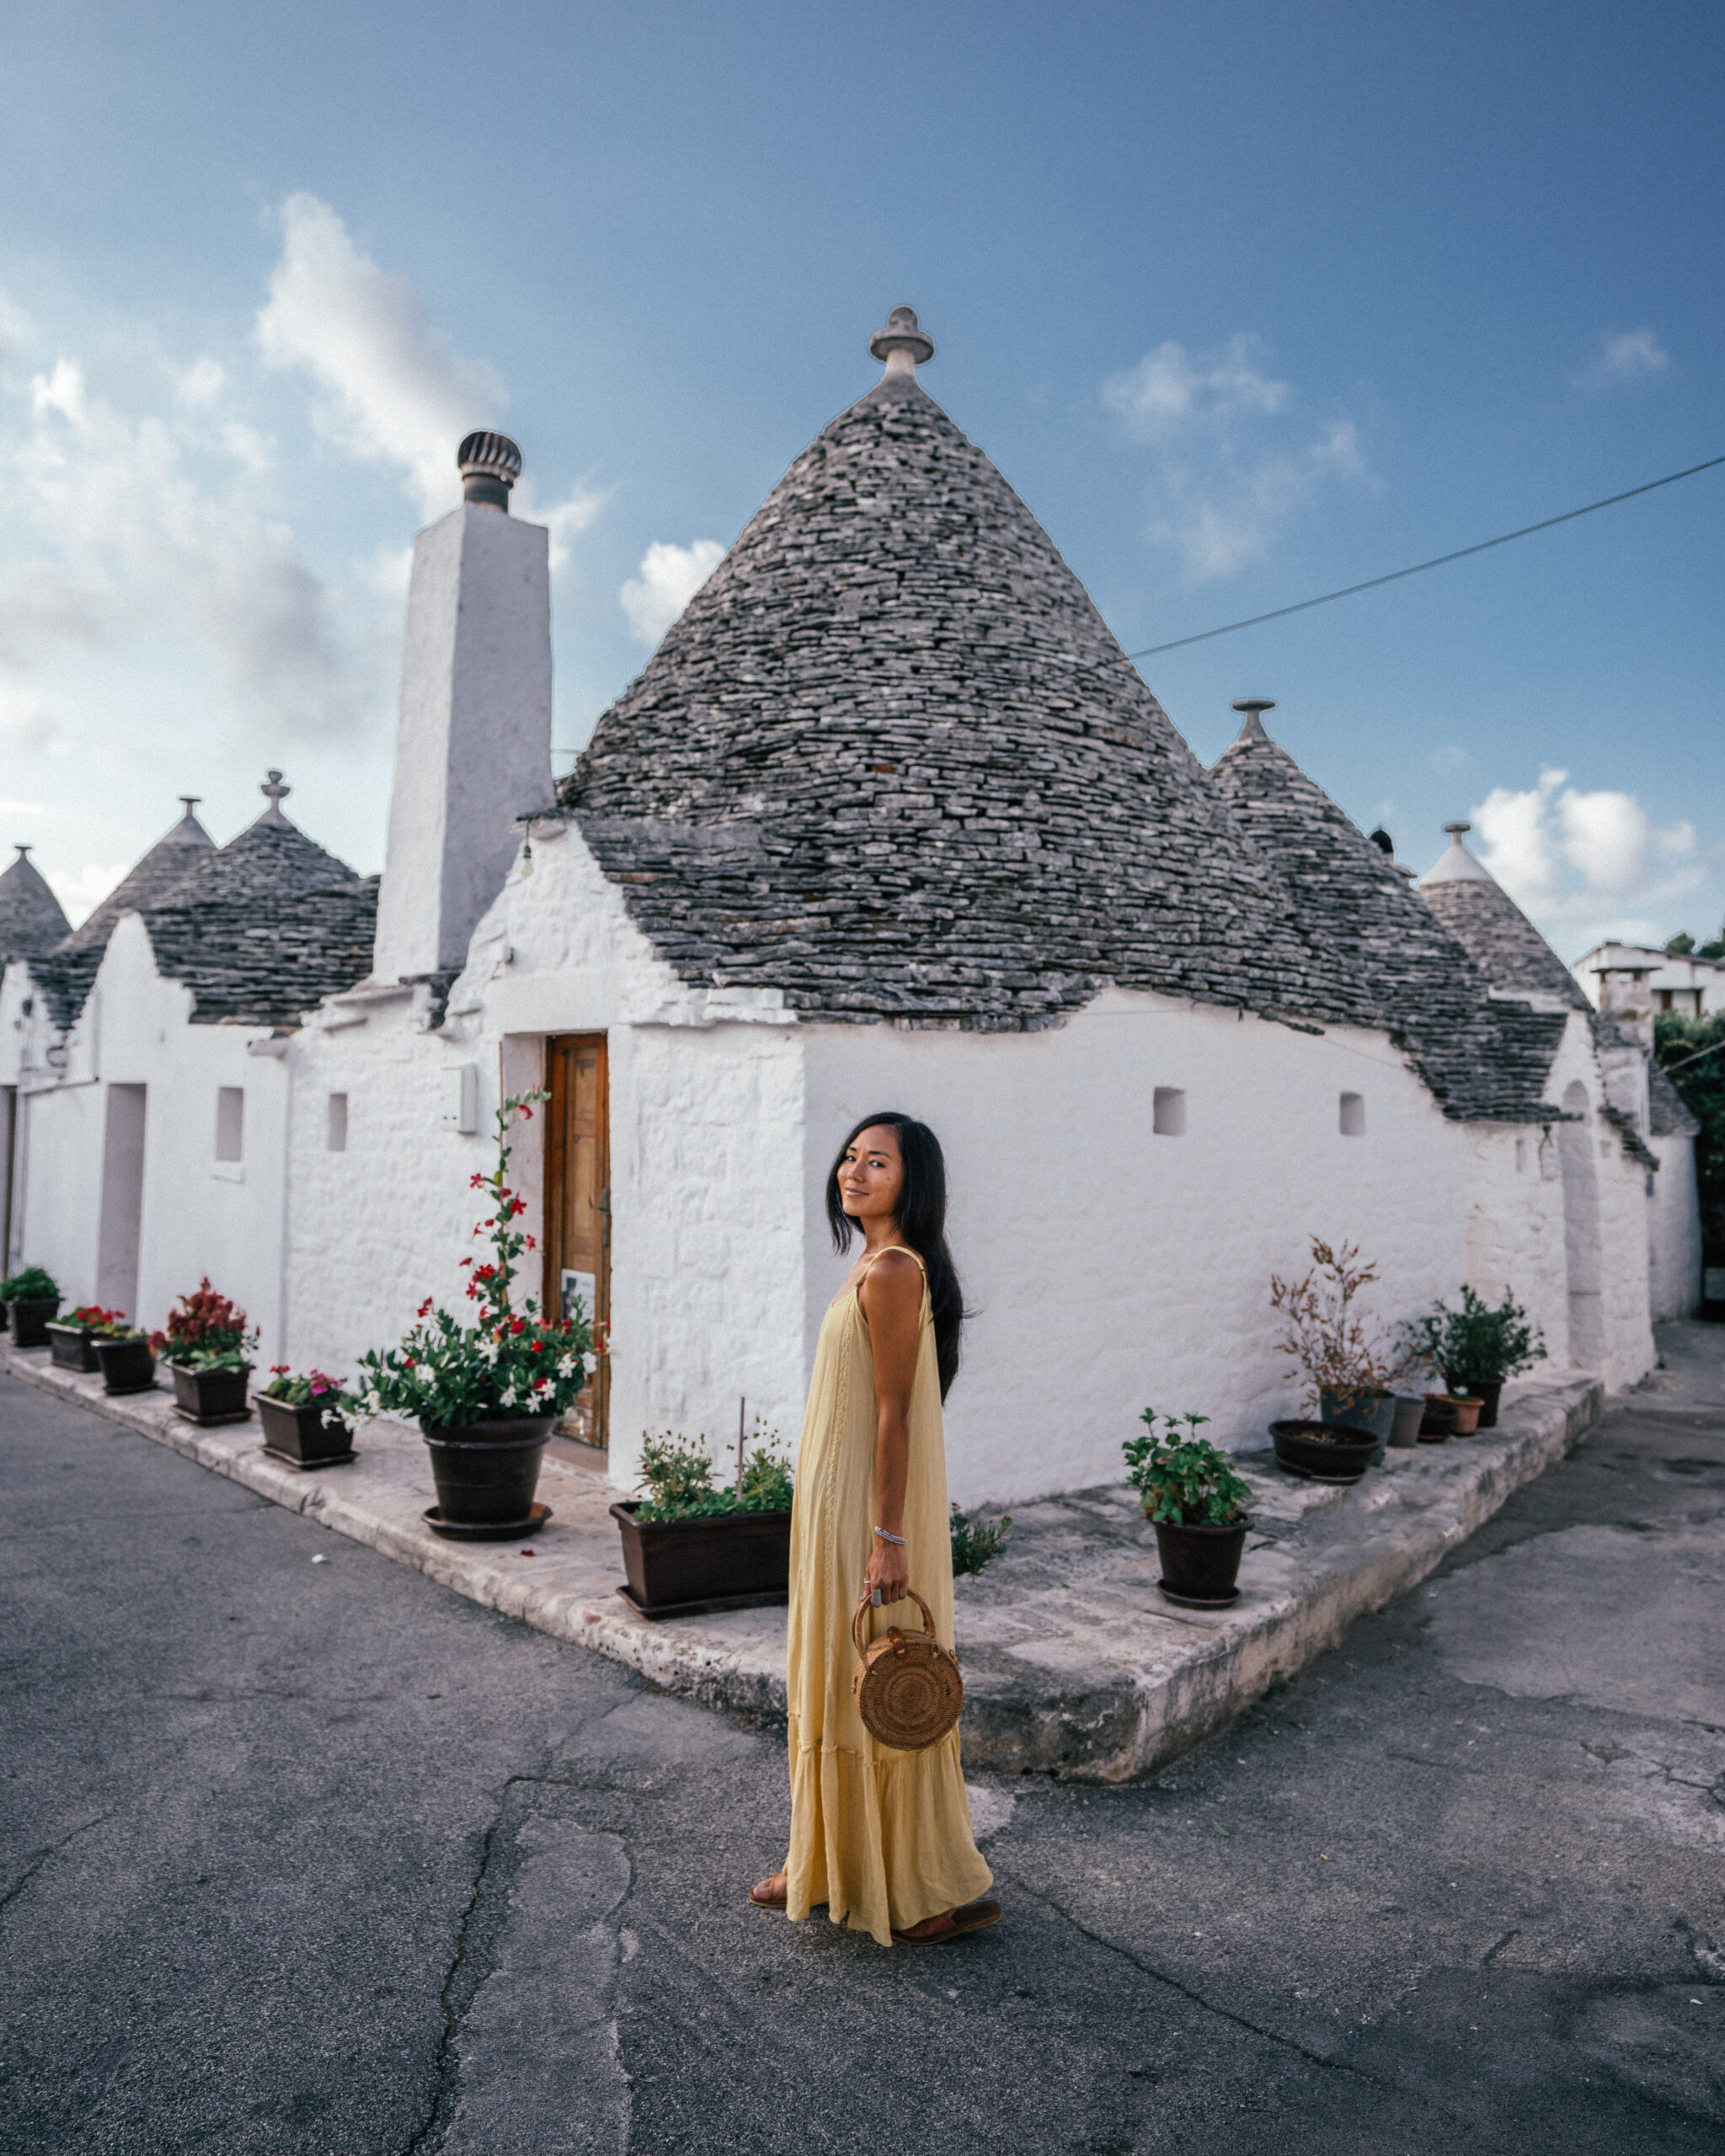 The ultimate guide to traveling to Puglia, Italy including the best towns, beaches, viewpoints, cave restaurants, hotels, day trips and more.